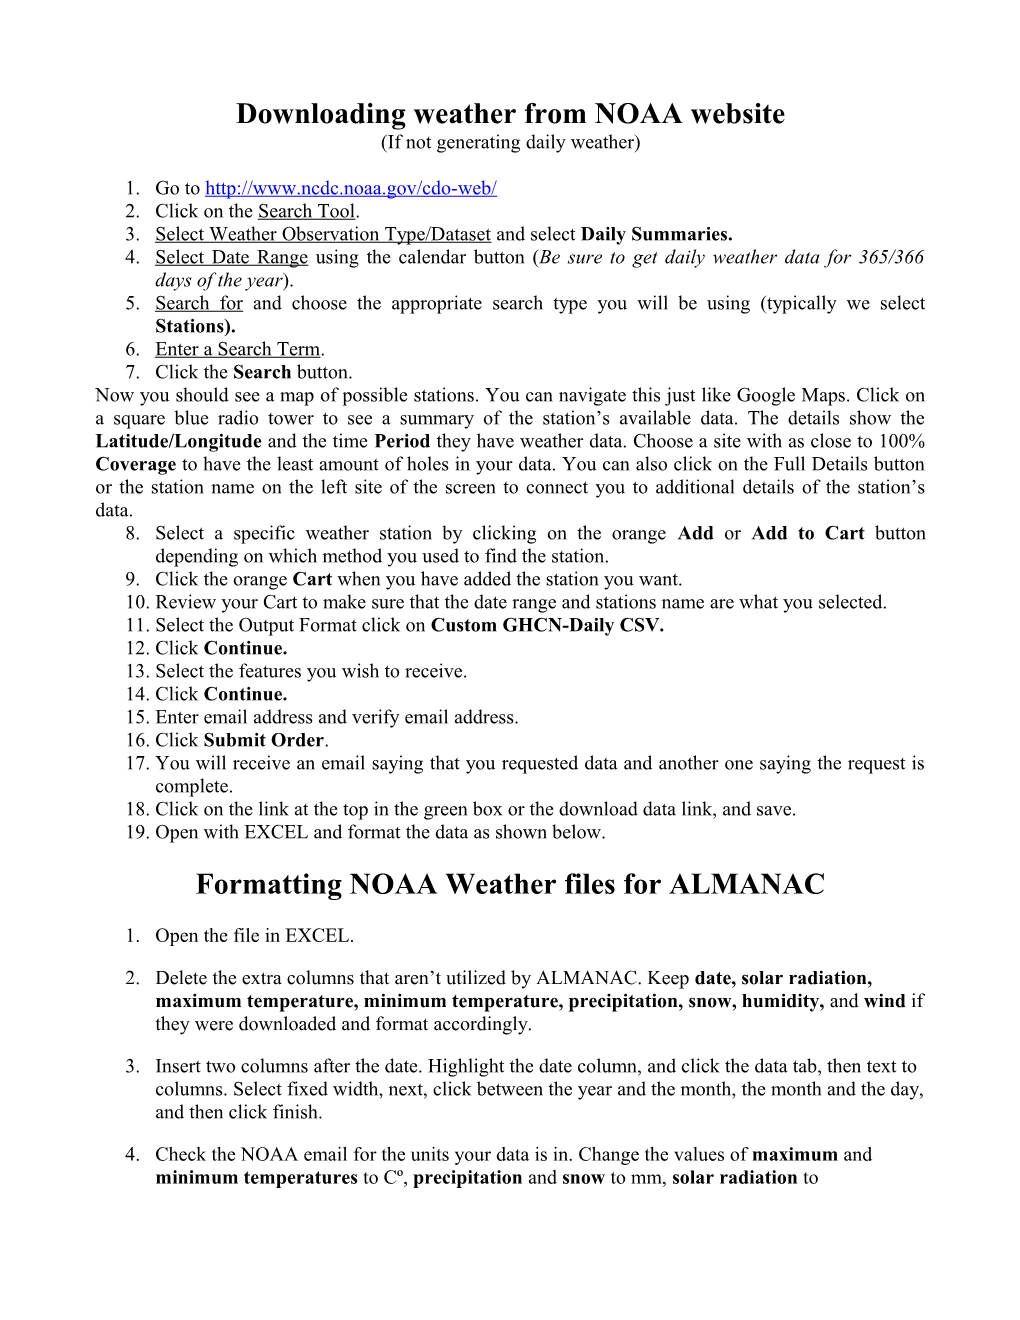 Working with NOAA Weather Files